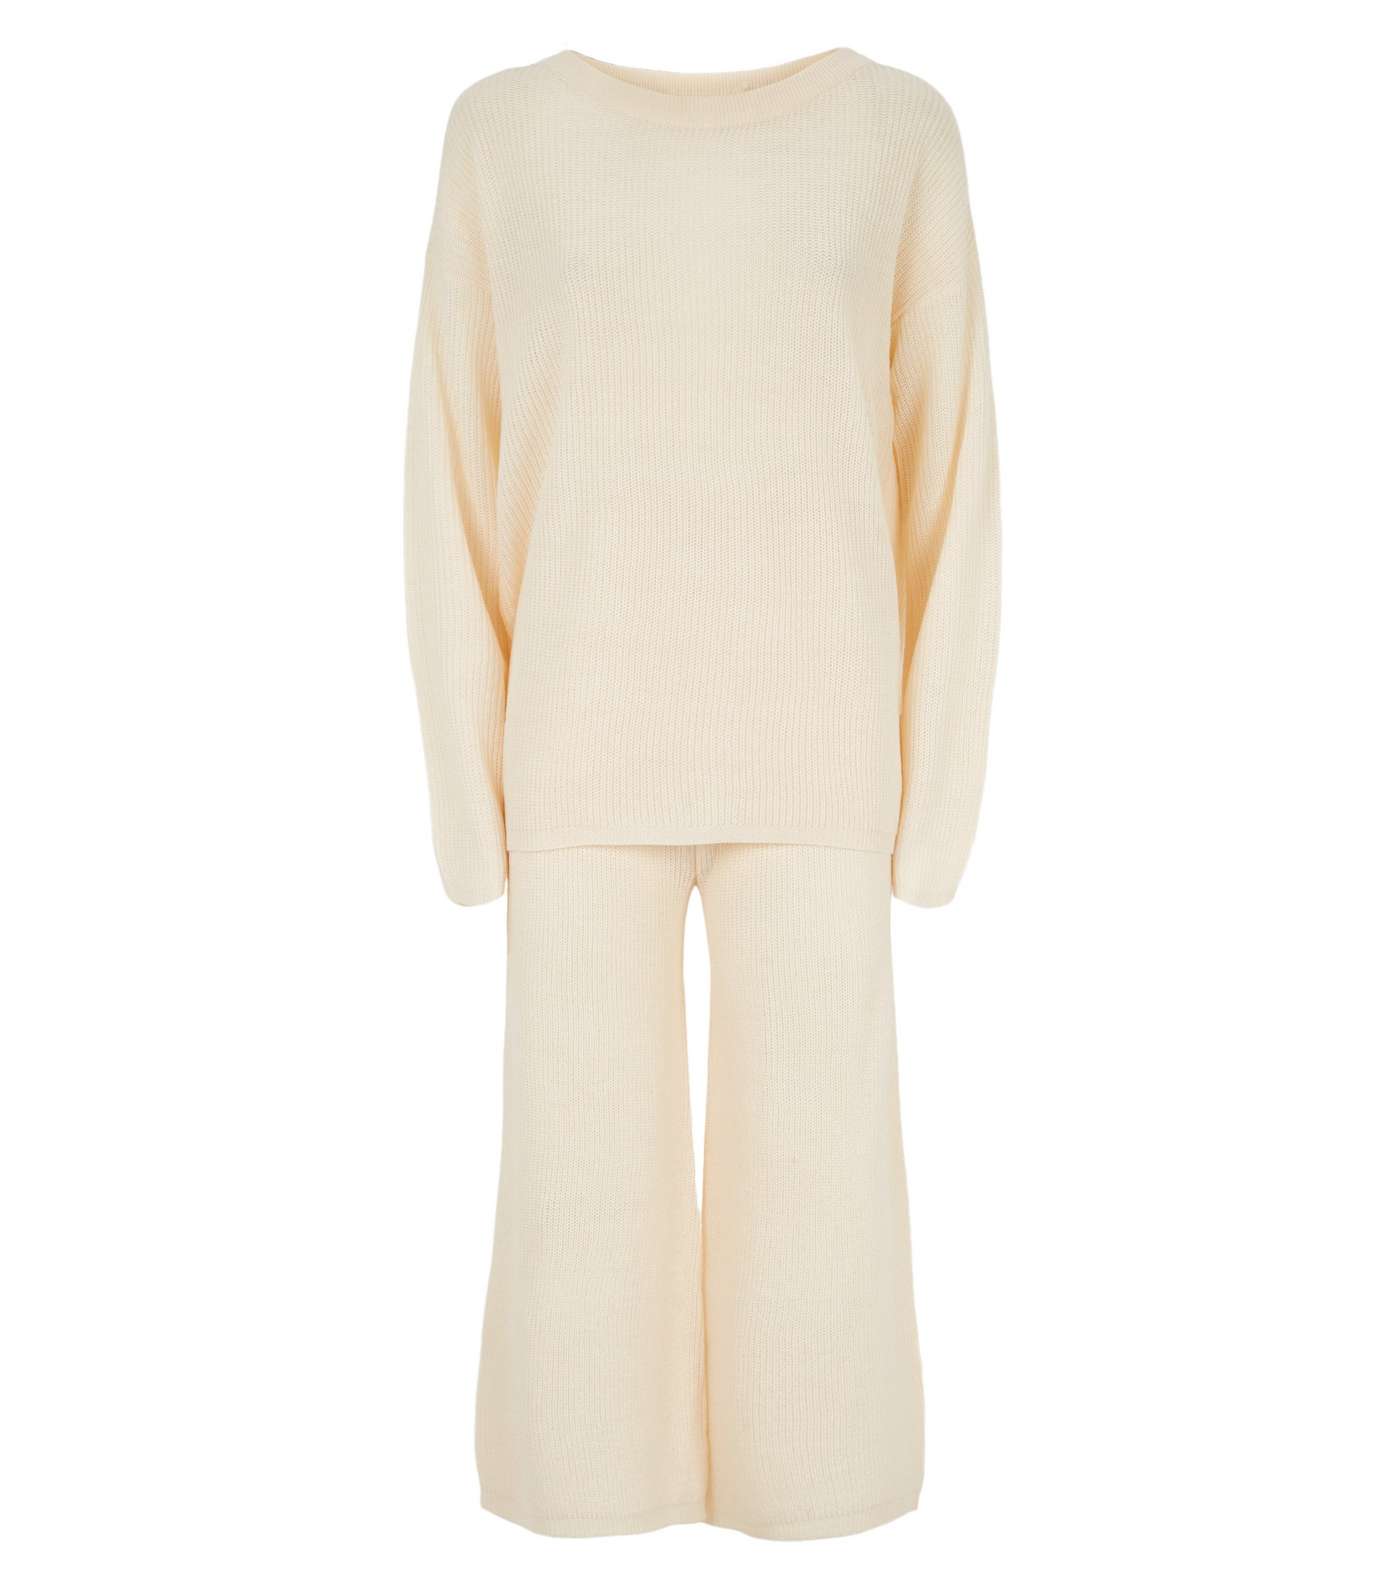 Brave Soul Cream Knit Jumper and Trousers Set Image 4